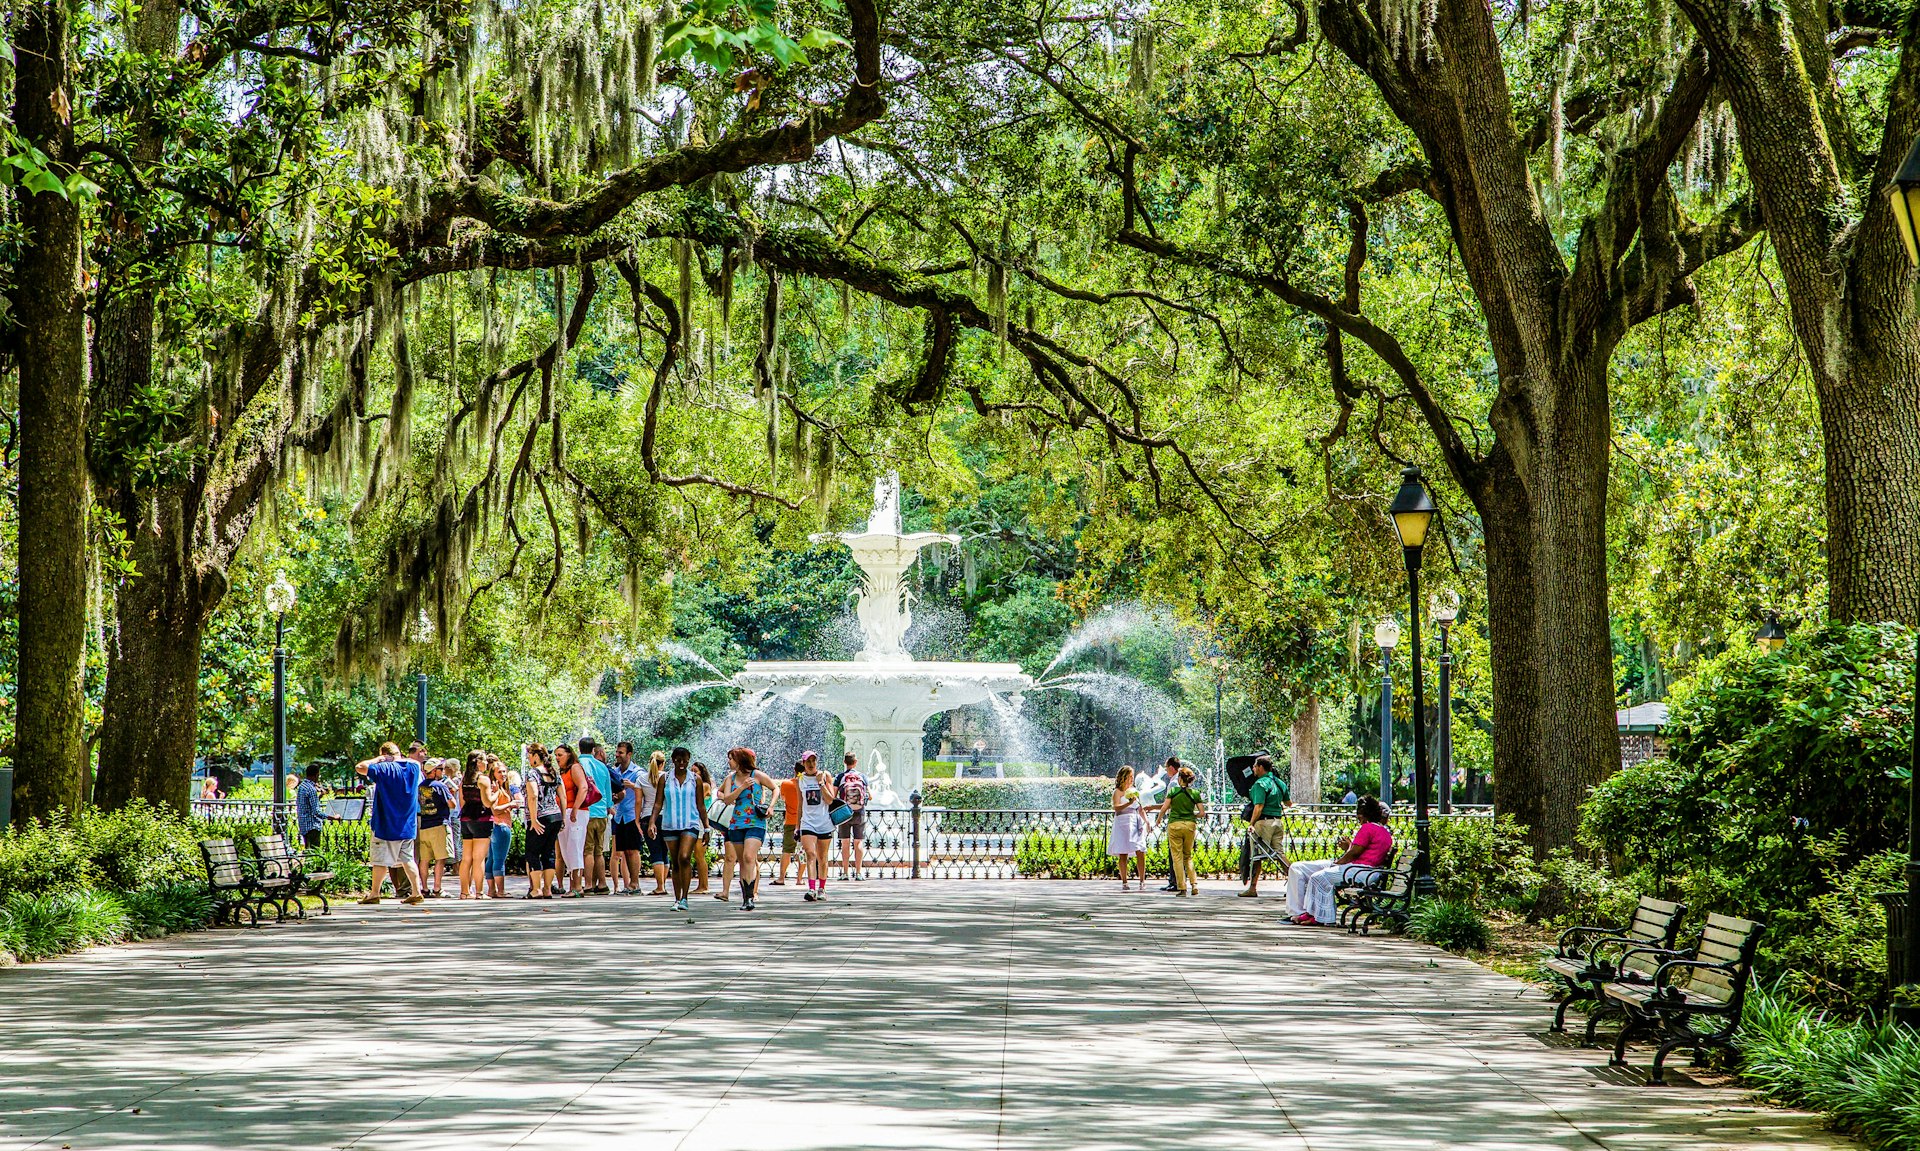 A long pathway lined with trees whose branches create a tunnel. People gather round a white water fountain at the end of the path